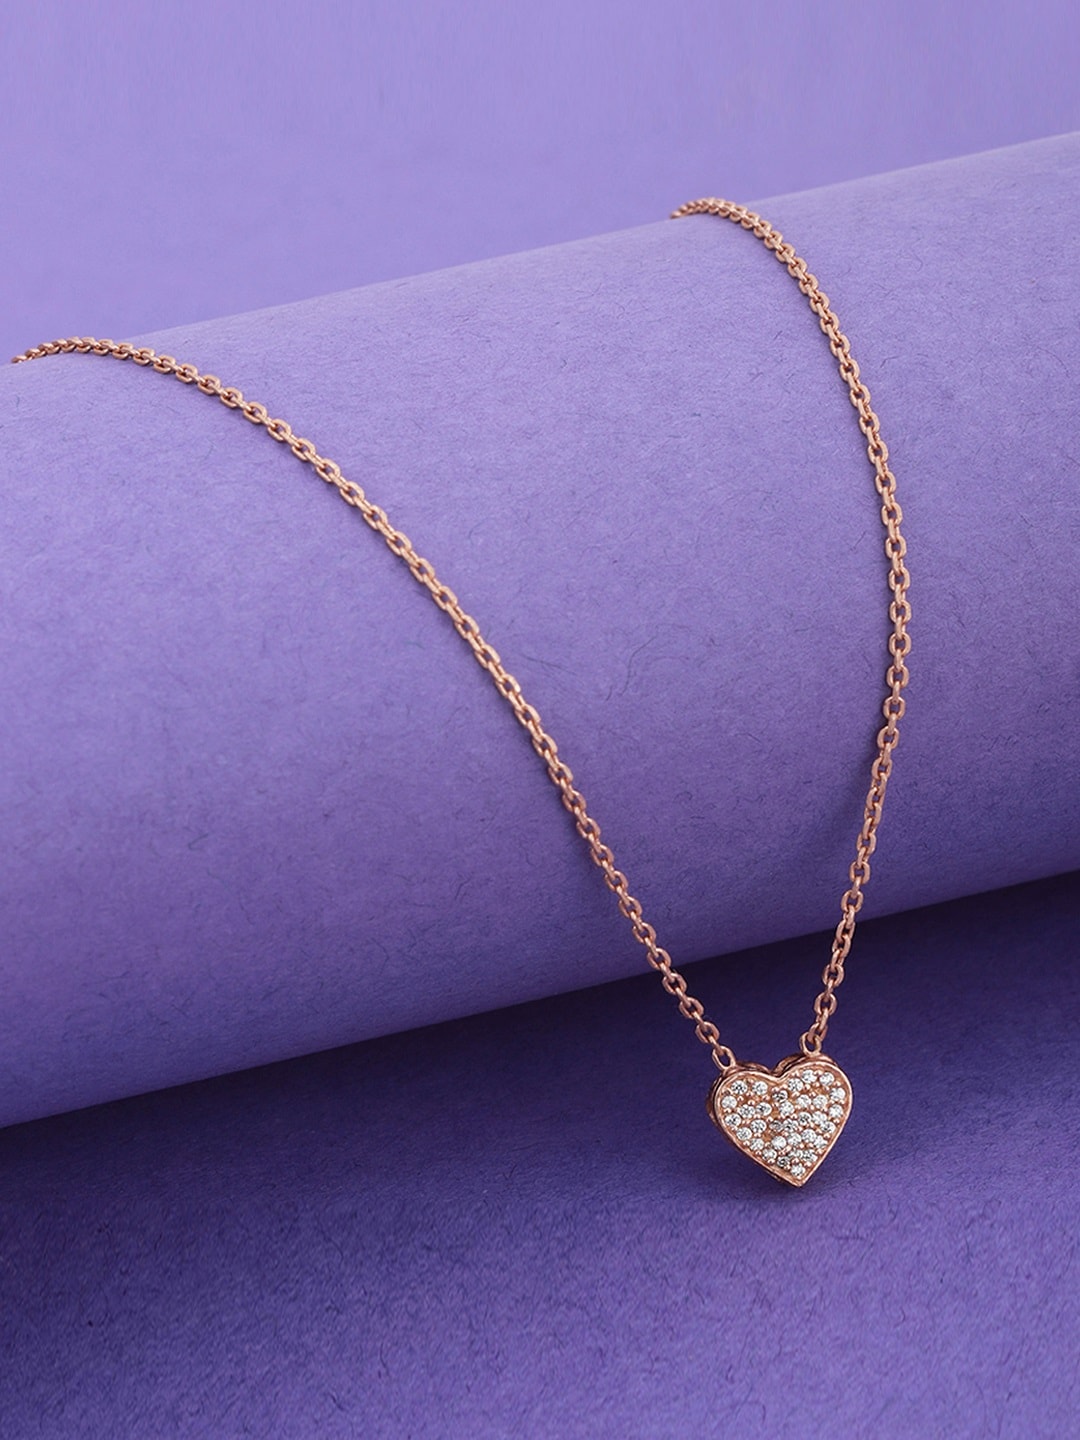 Carlton London Rose Gold-Plated CZ-Studded Necklace Price in India